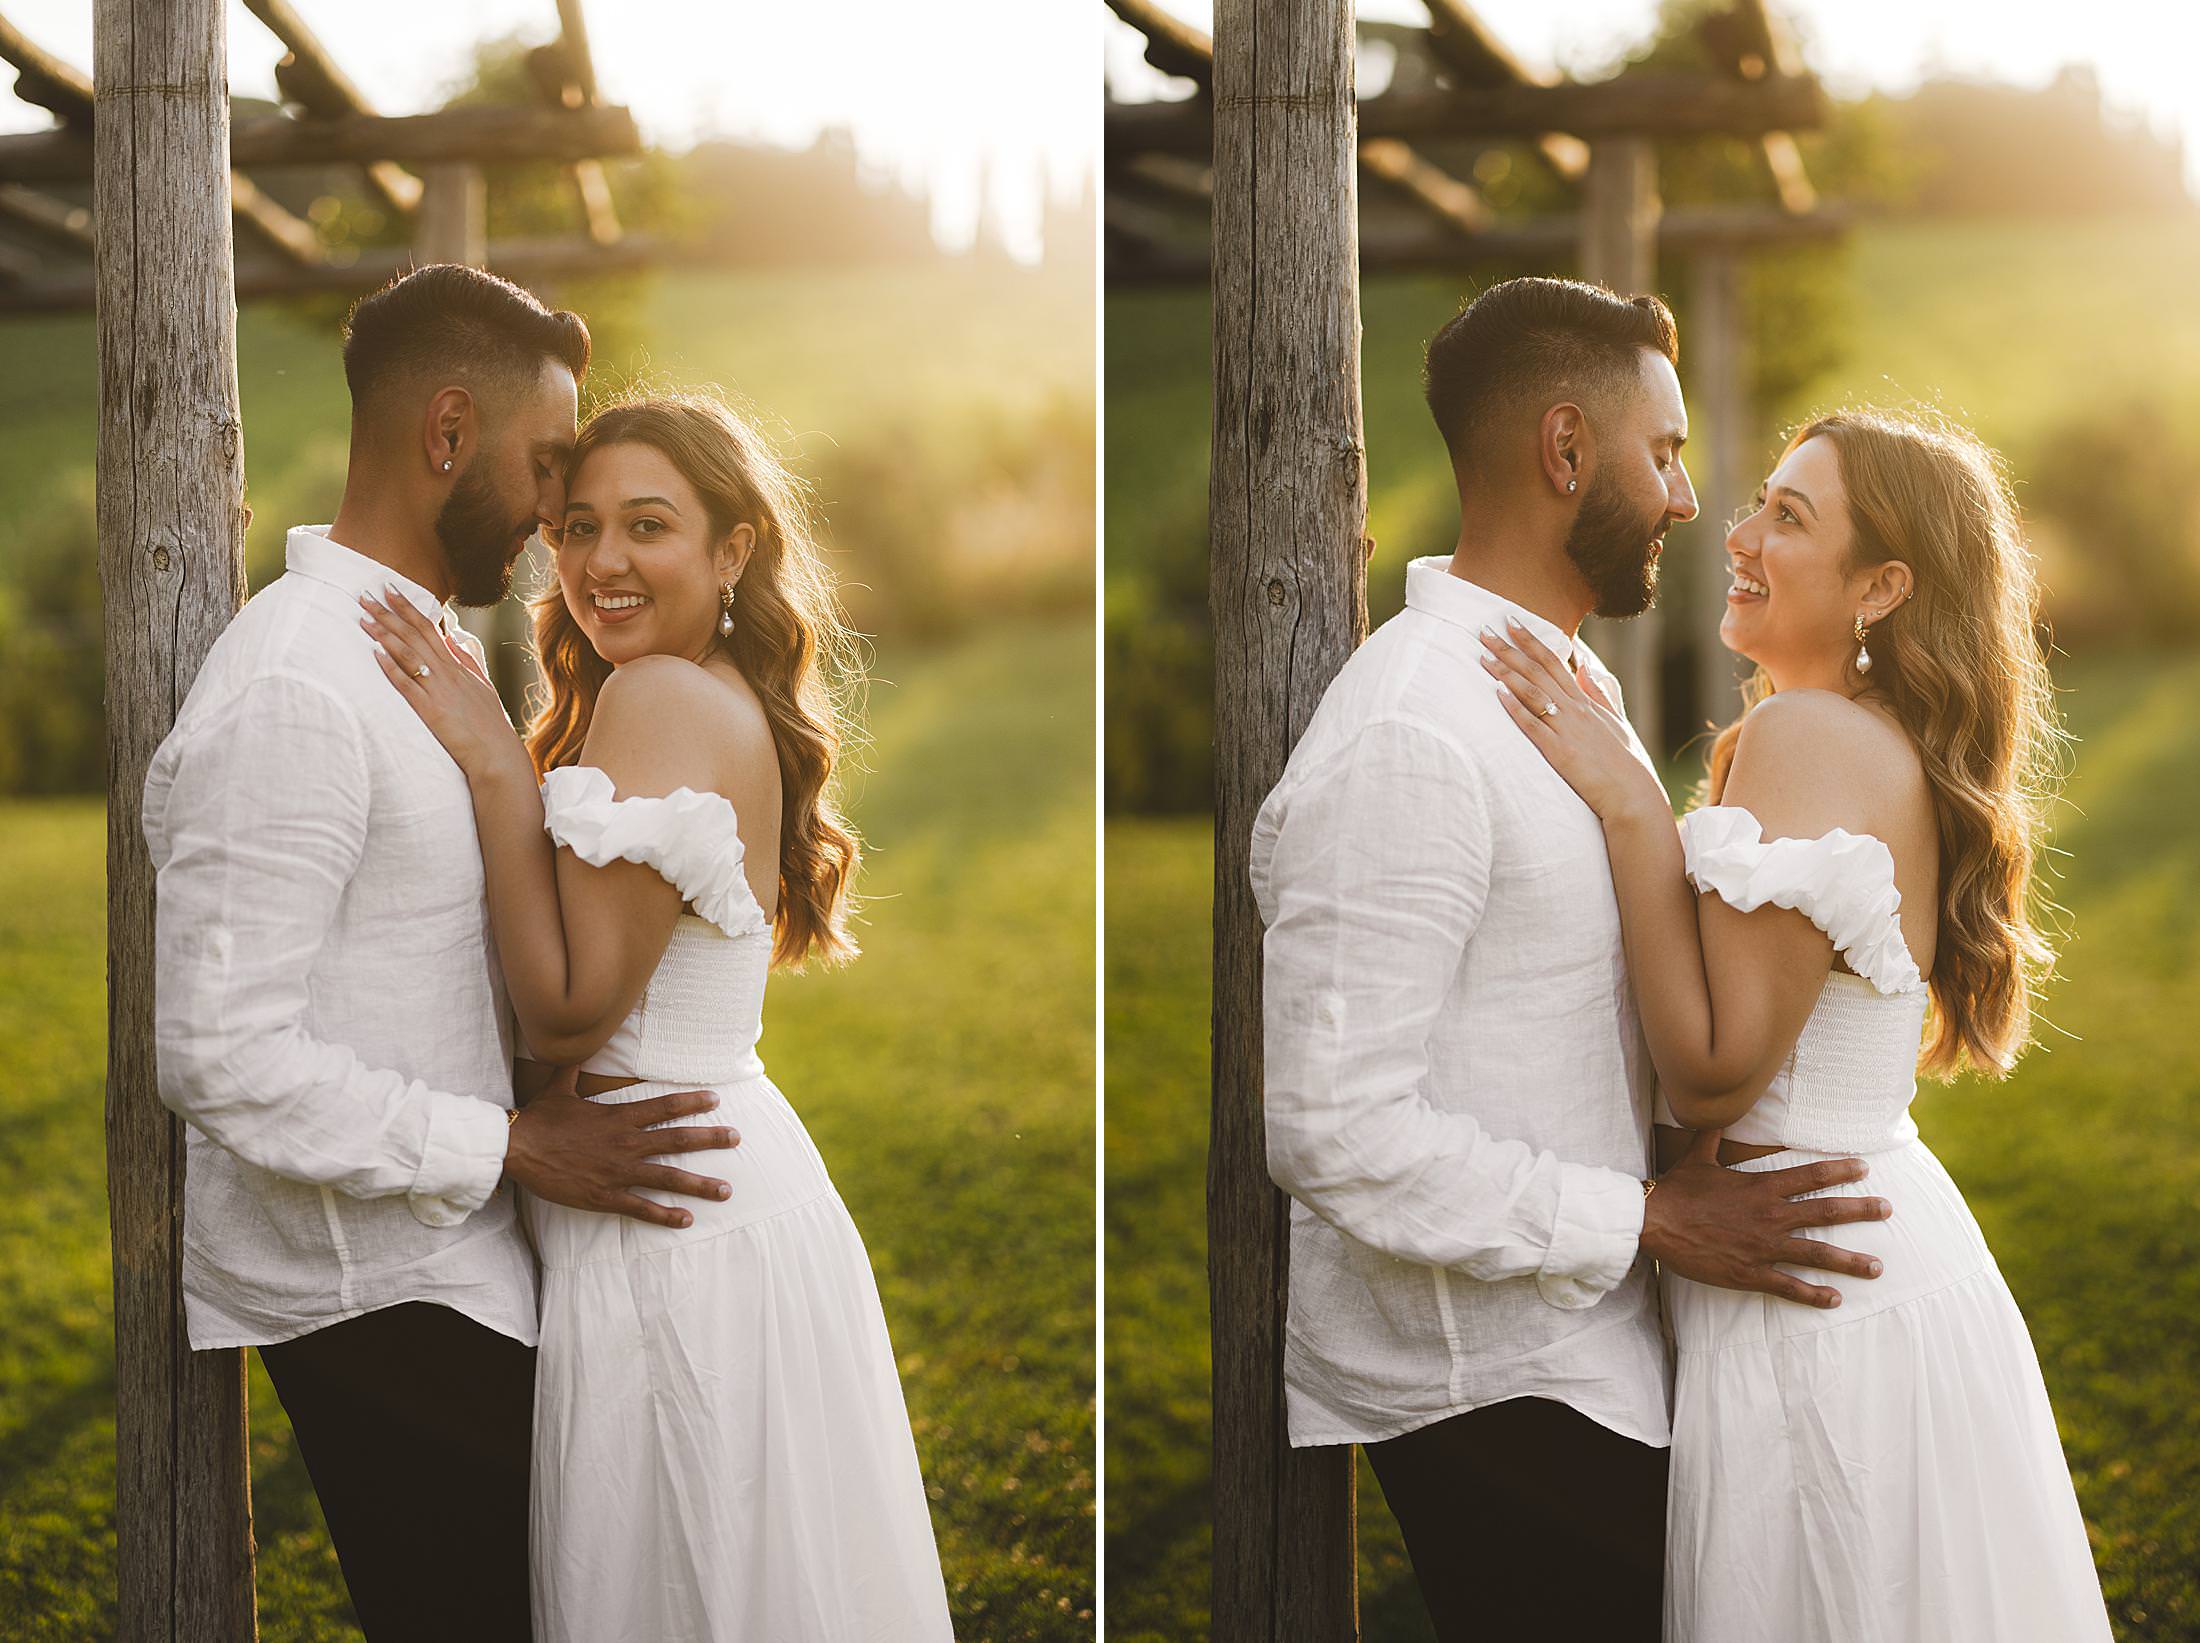 Romantic engagement session during golden hour at Borgo del Cabreo venue in the heart of Chianti countryside